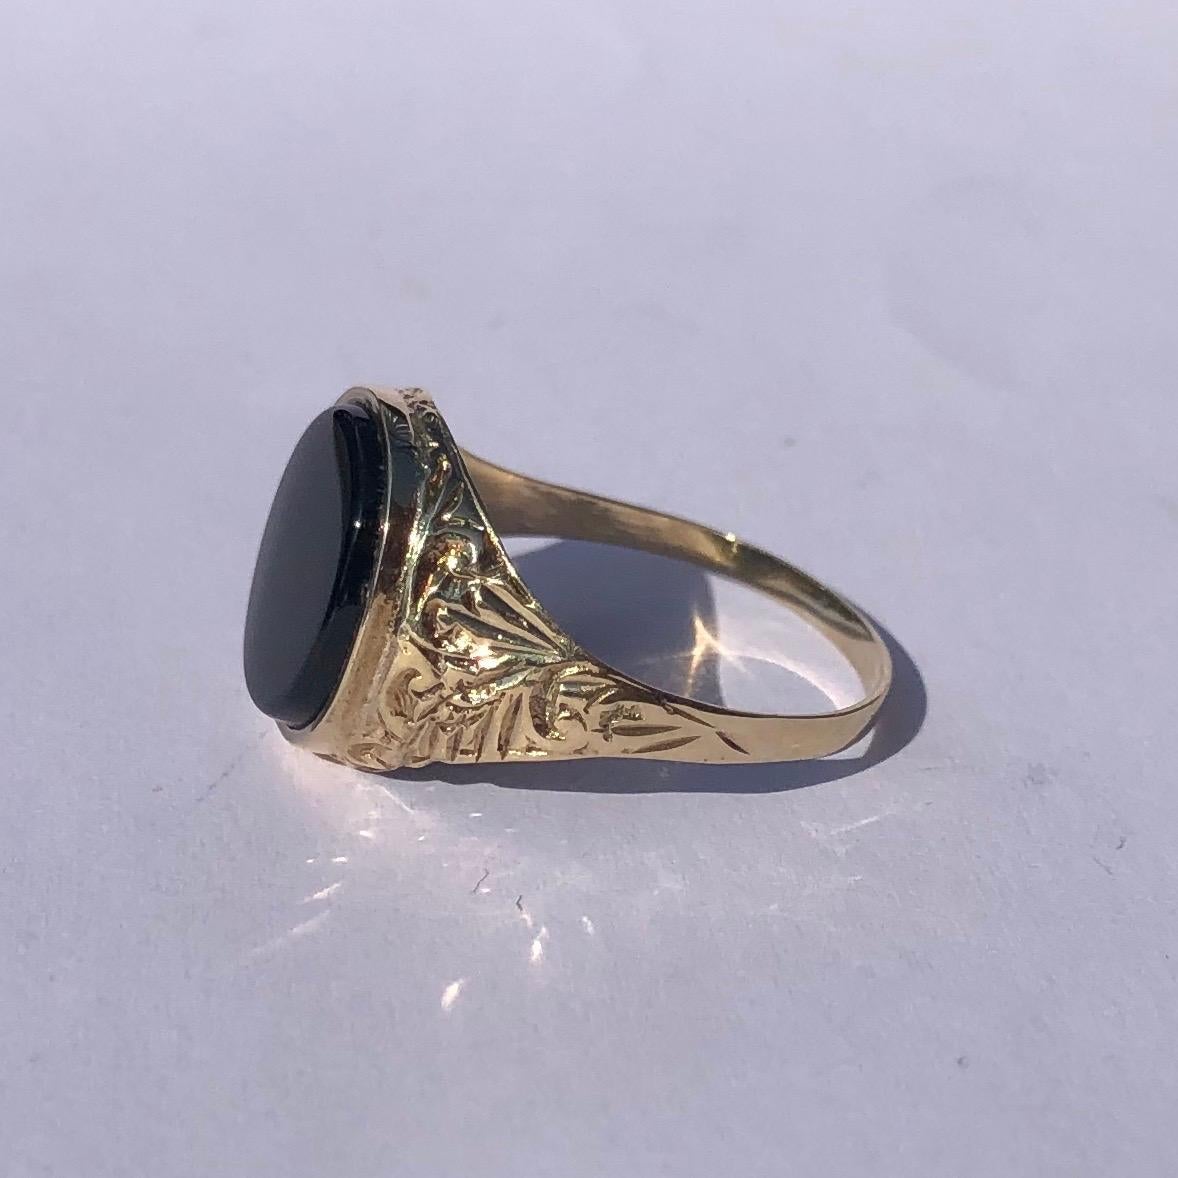 This glossy and shiny Onyx signet ring has beautifully intricate engraved shoulders. Made in Birmingham, England.

Ring Size: R or 8 3/4
Stone Dimensions: 11x9.5mm 

Weight: 2.13g
